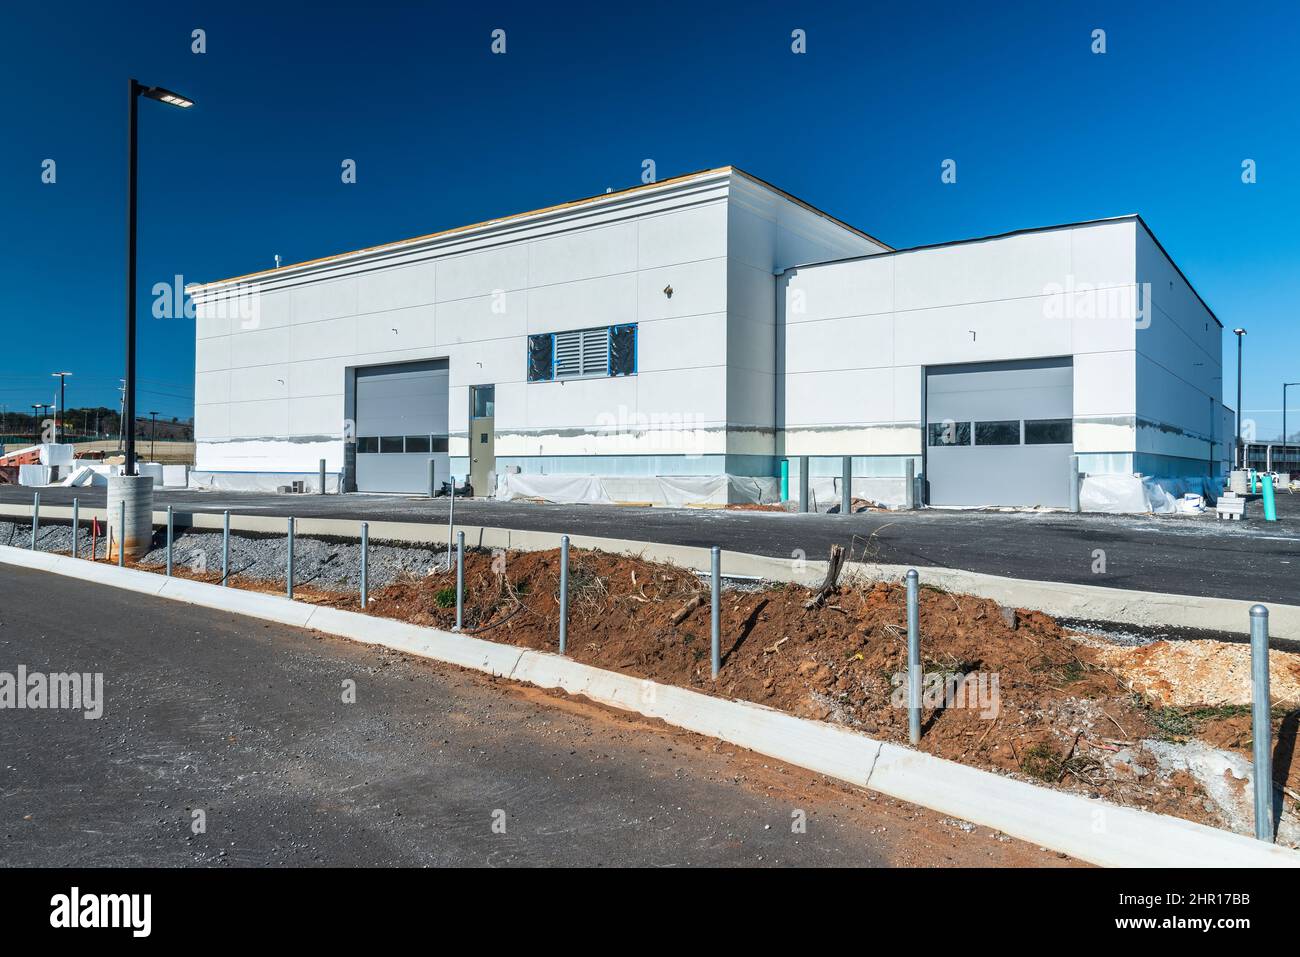 Horizontal shot of the garage entrance to a new industrial building under construction with copy space. Stock Photo